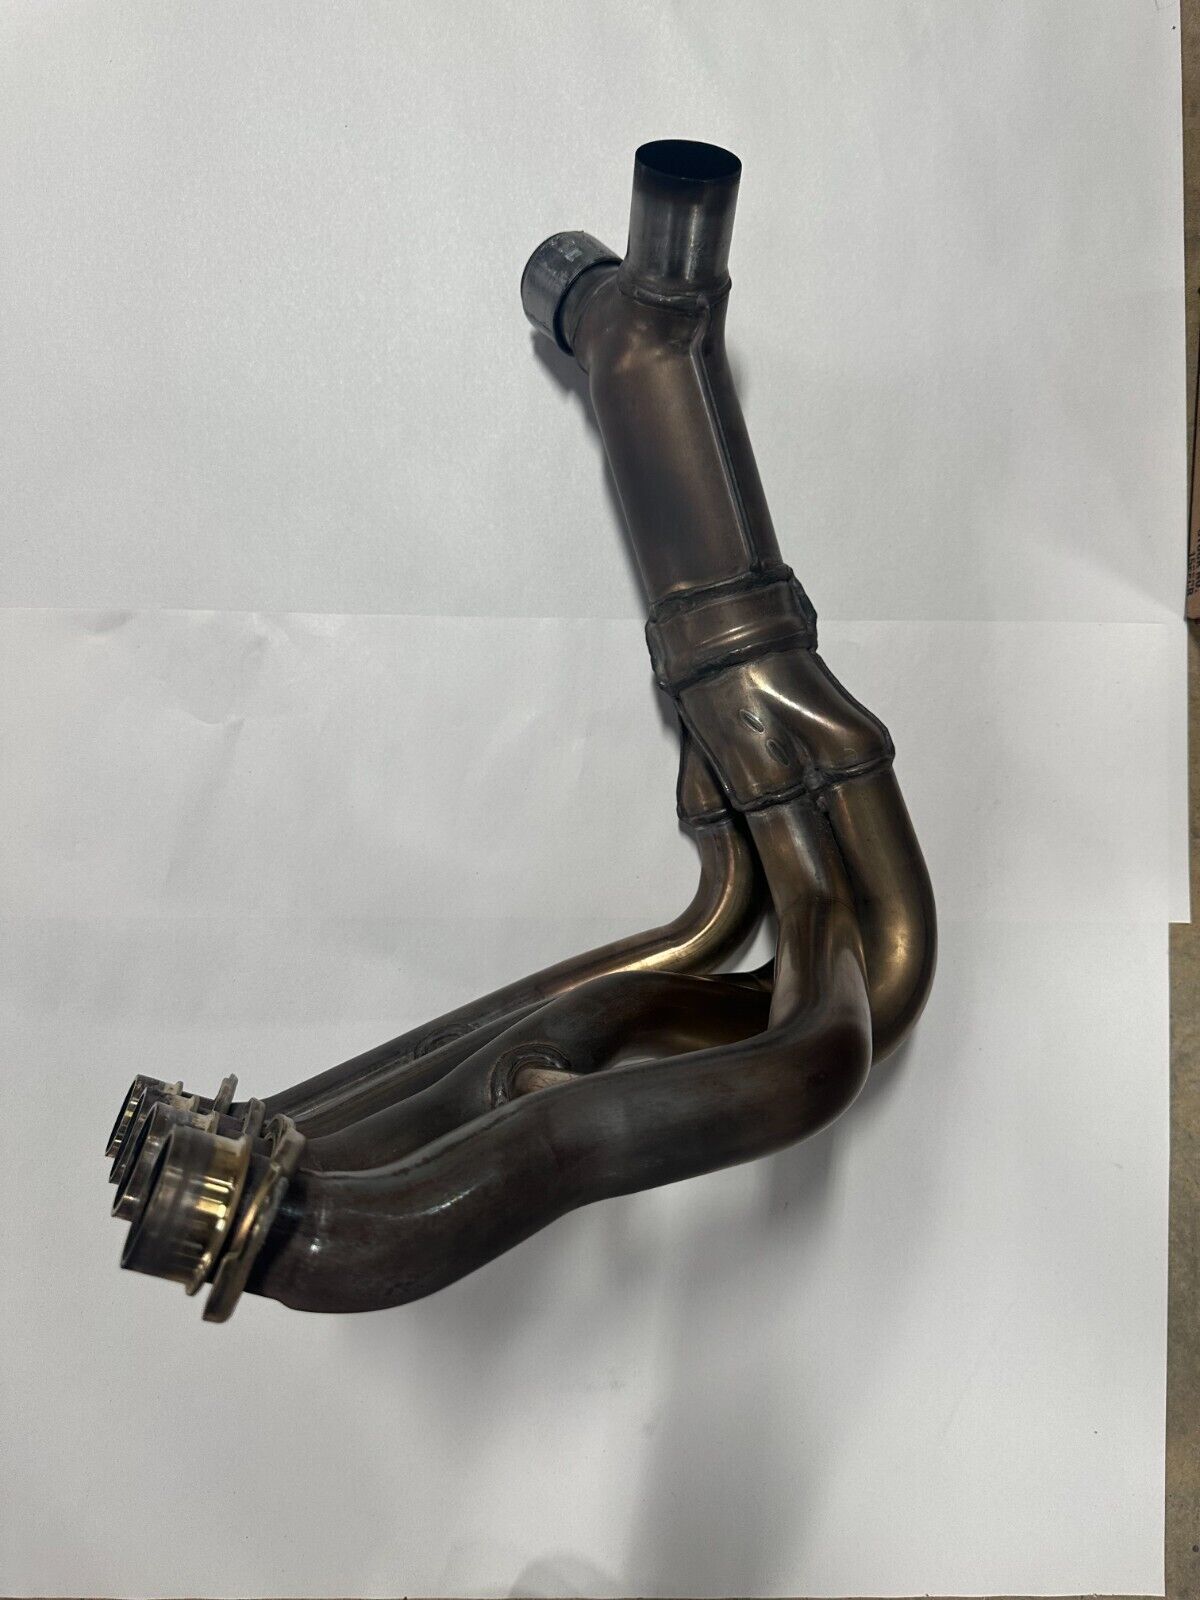 2012-2022 KAWASAKI ZX-14 OEM EXHAUST MANIFOLD USED IN GOOD CONDITION